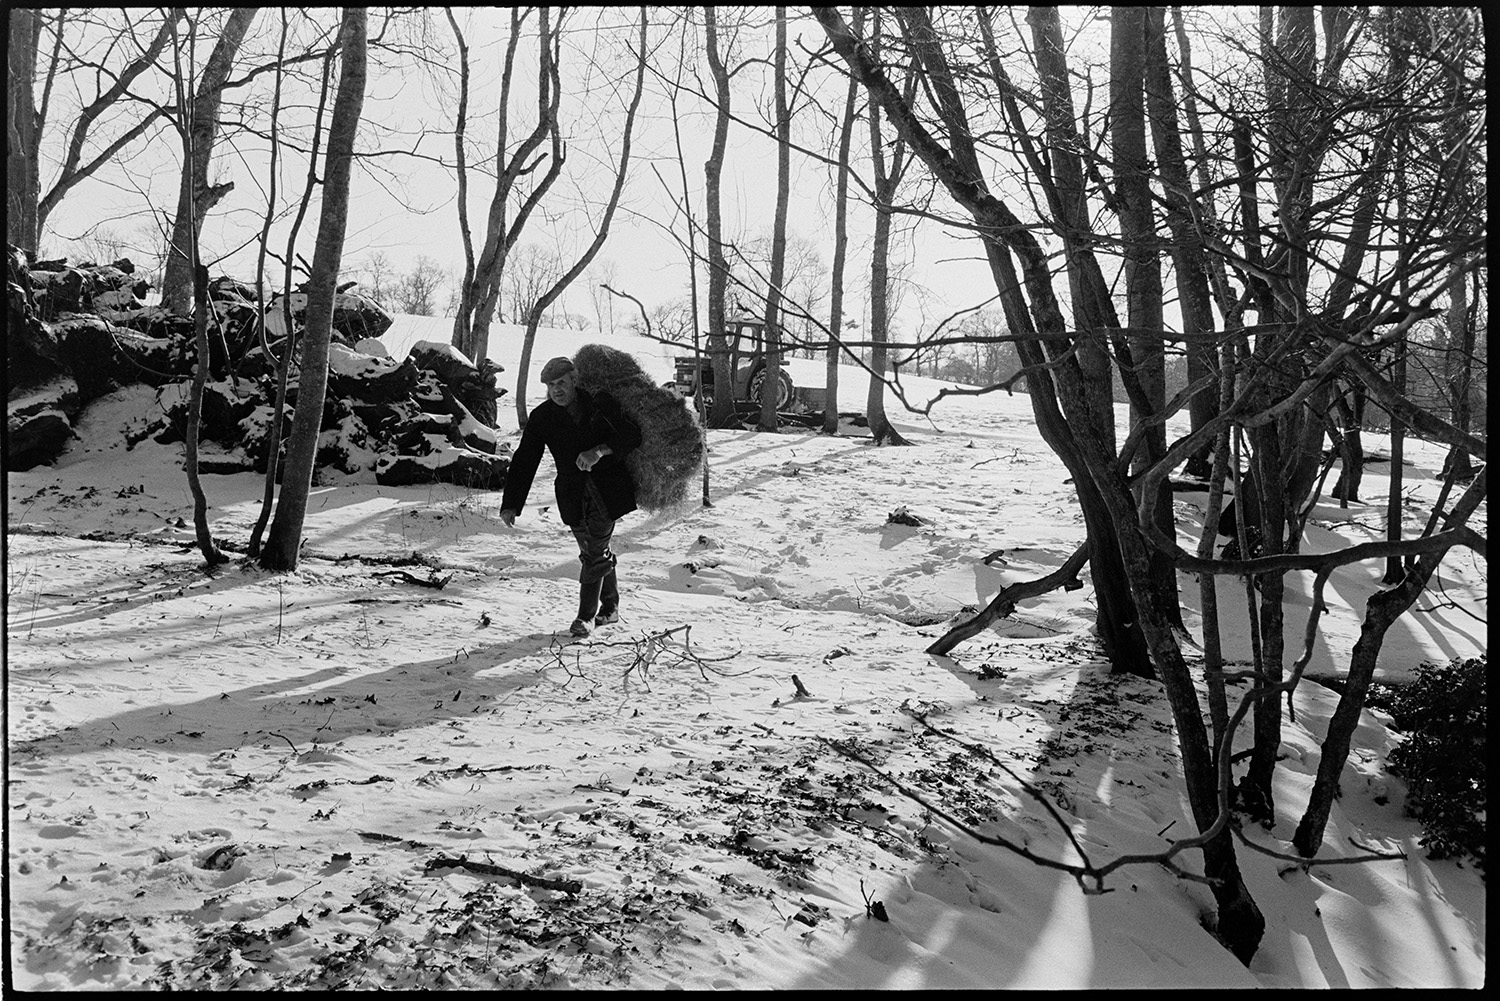 Snow, farmer feeding sheep with tractor and link box, carrying hay in wood, bright sun, snowdrift. 
[Alf Pugsley carrying a hay bale on his shoulders through a snow covered wooded area at Lower Langham, Dolton. He is taking it to feed sheep. His tractor and link box is parked in the background.]